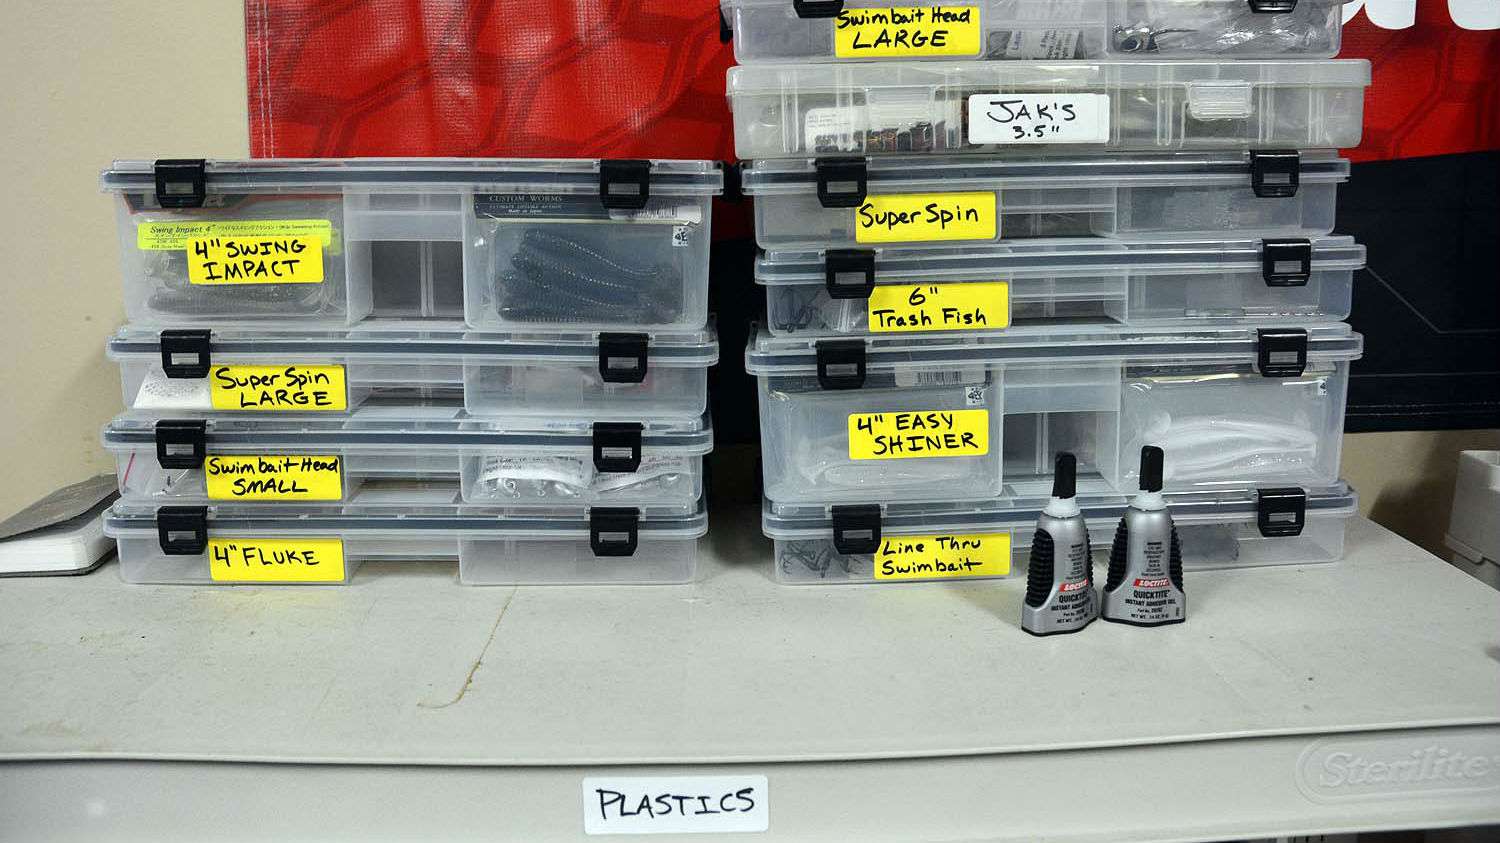 Swimbaits and related terminal tackle is stored in boxes with the yellow labels. Nearby are bottles of Loctite glue for permanently securing soft plastics to the jig heads.